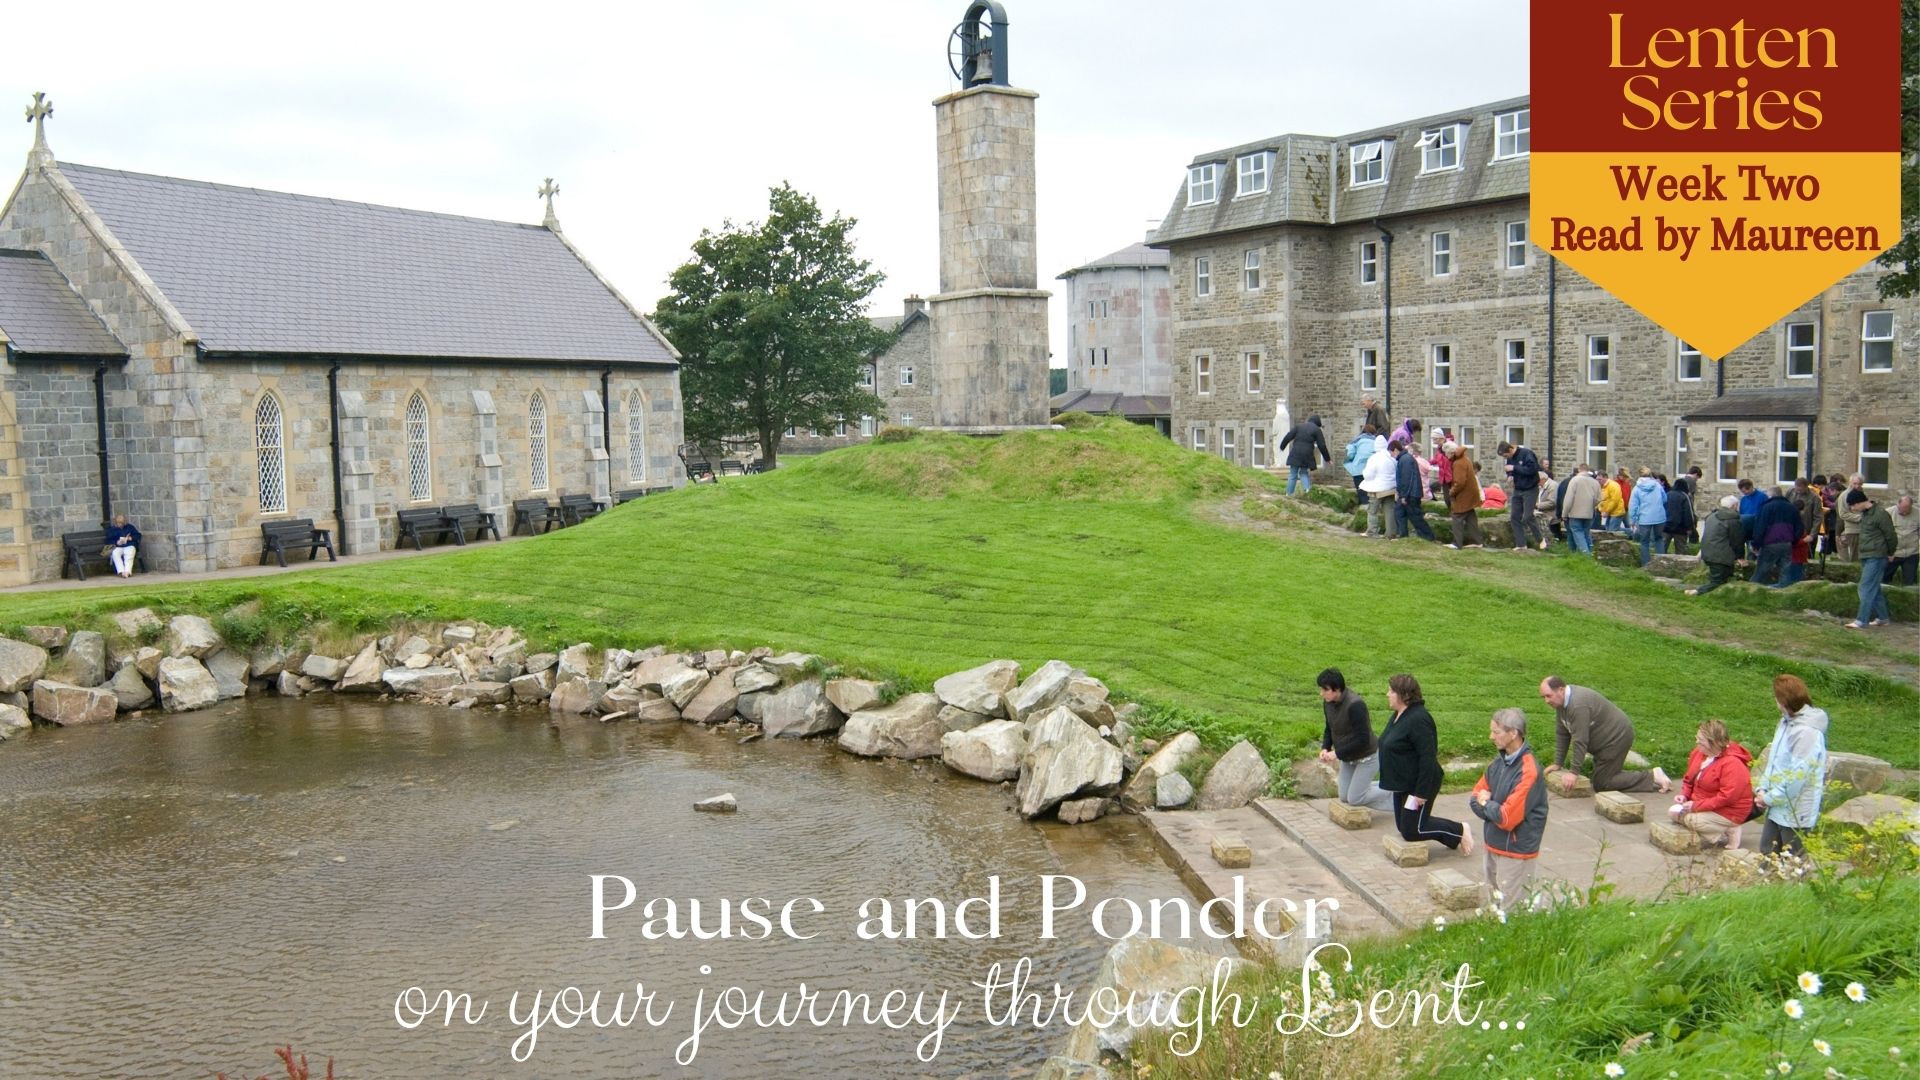 Pause and Ponder on your journey through Lent - week two with Maureen